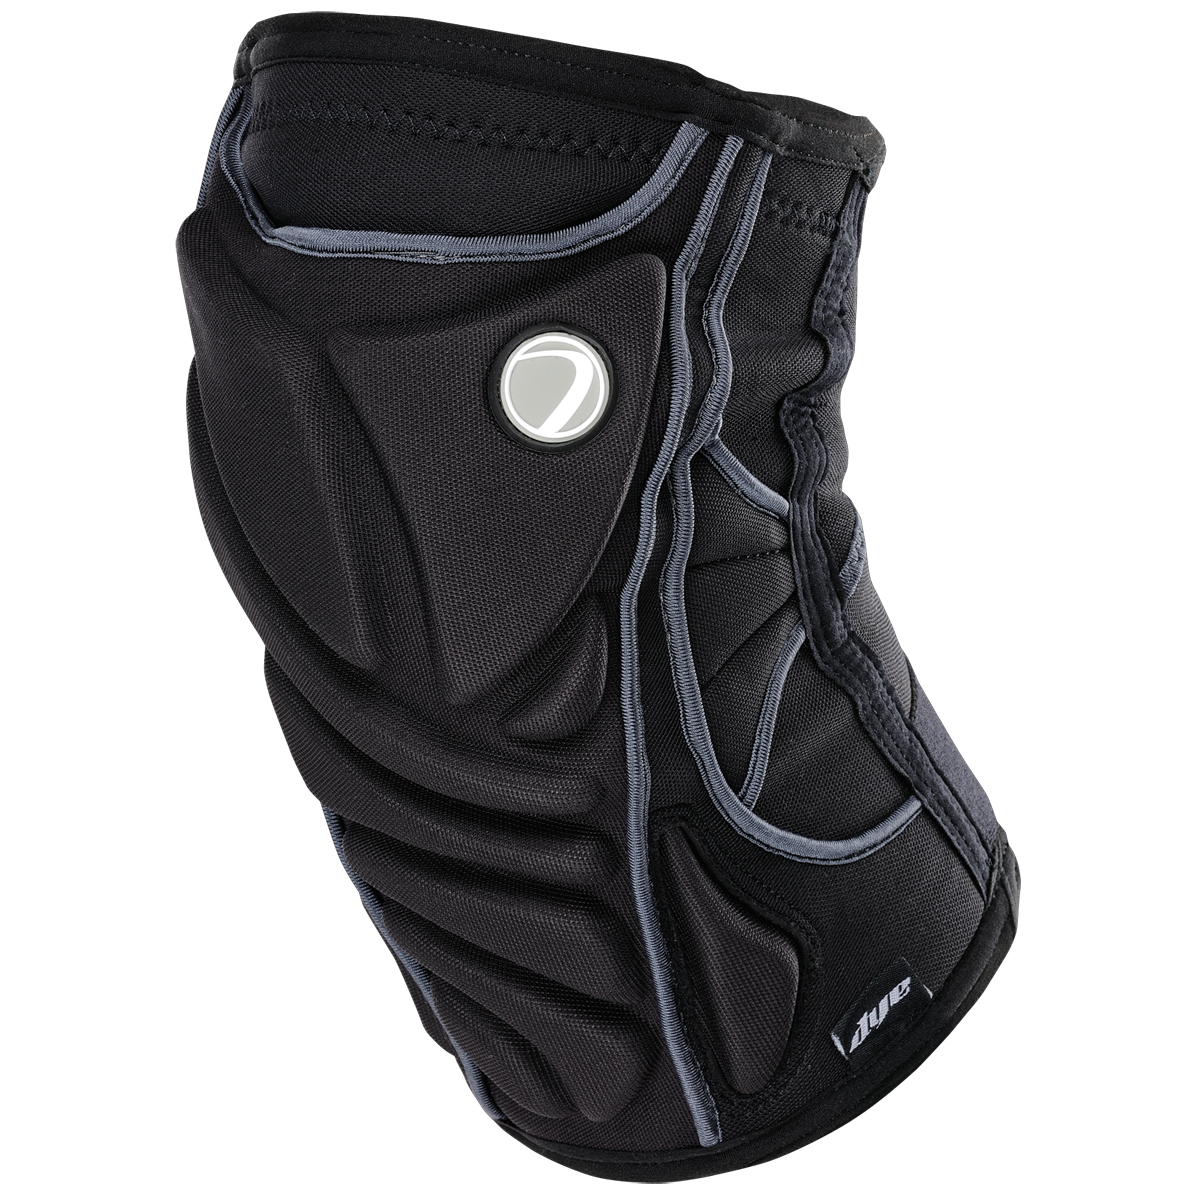 Dye Performance Paintball Knee Pads - Small